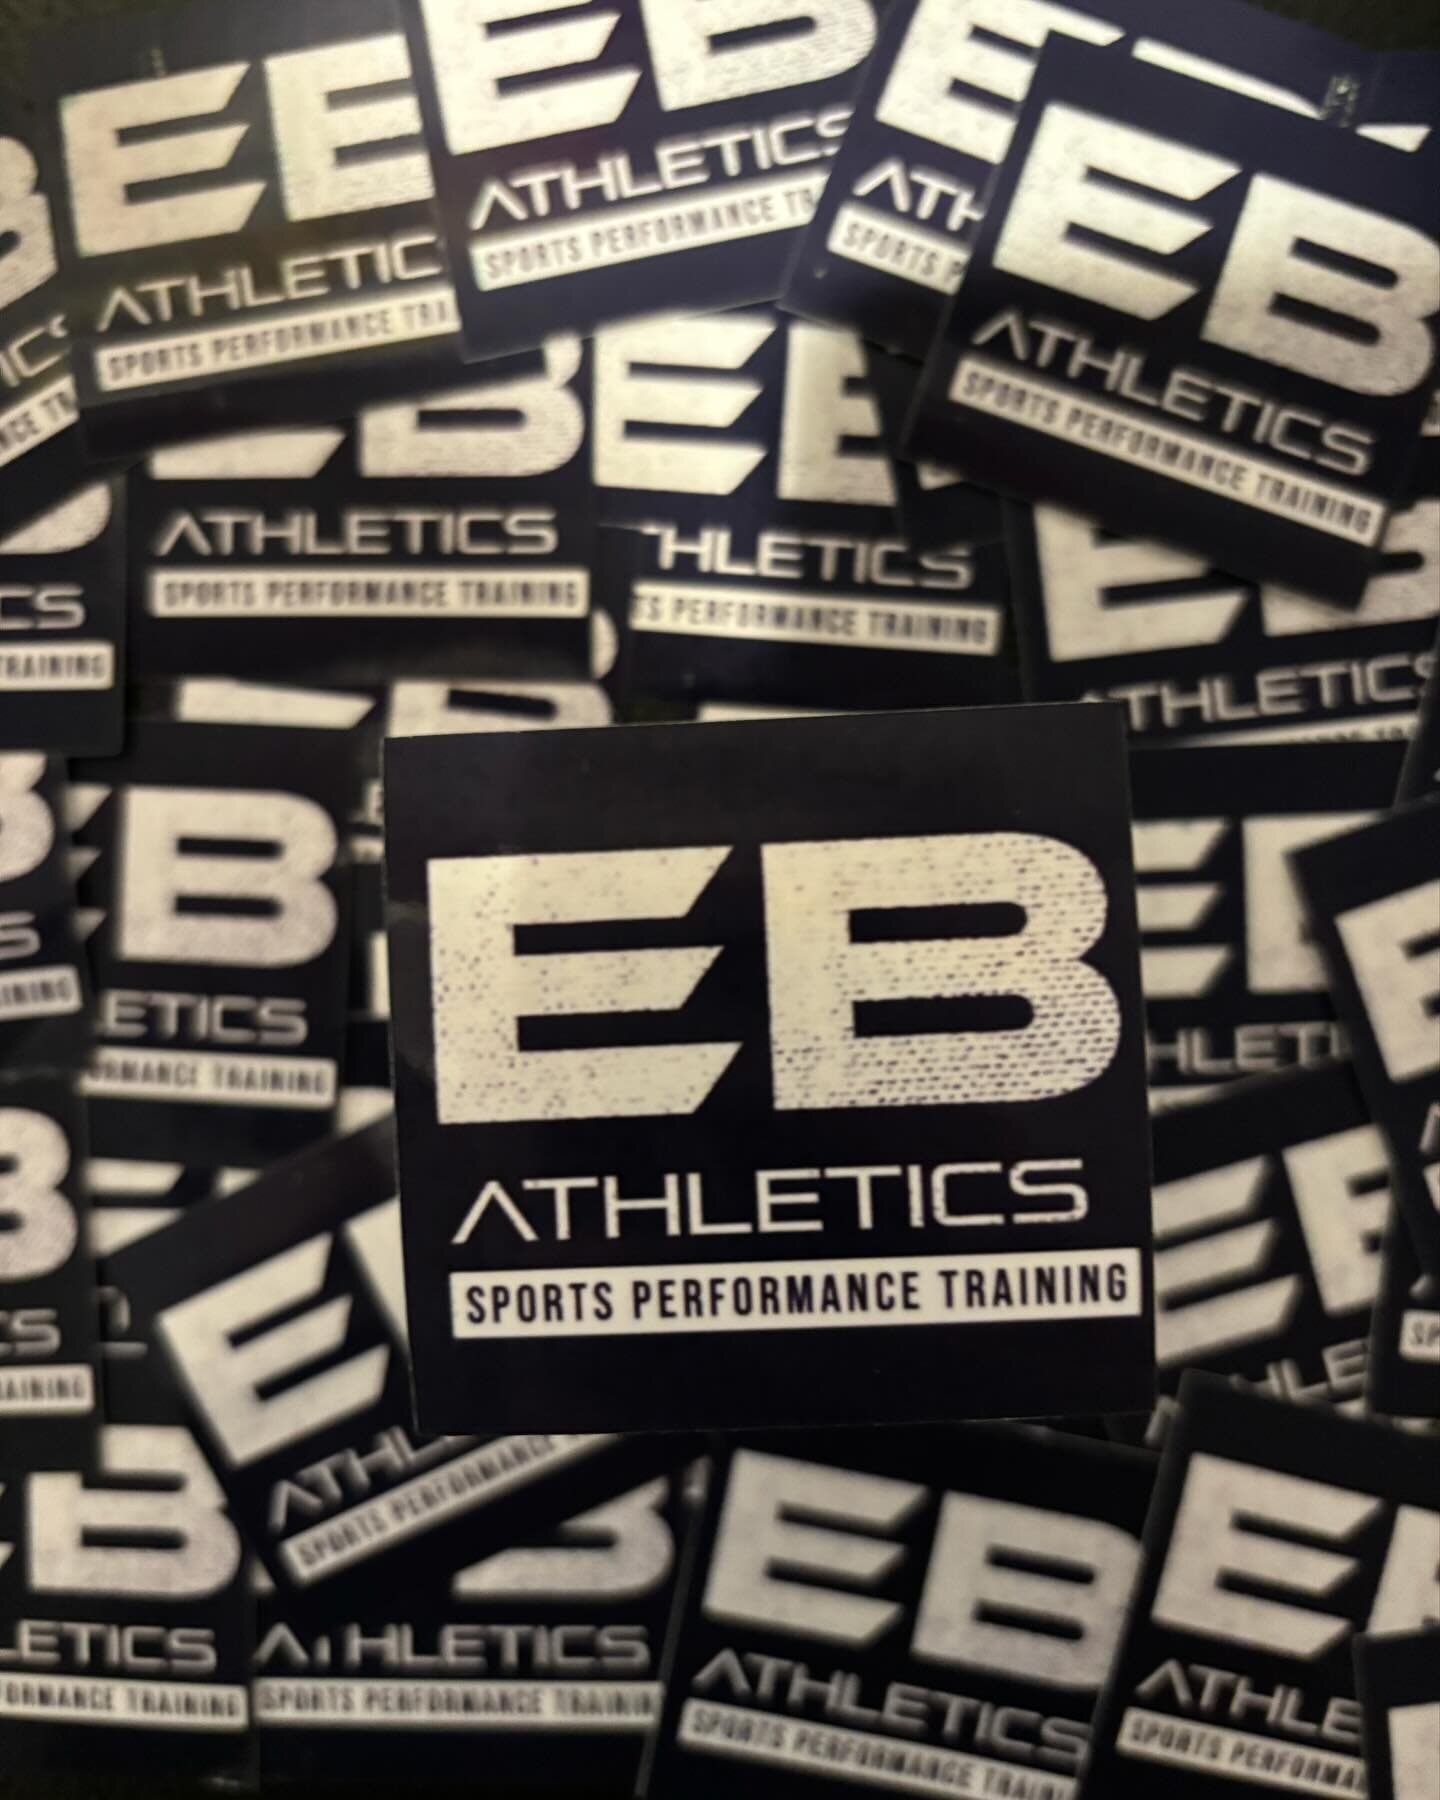 Almost finished with one of our largest orders! We are huge @ebathleticsllc fans, been training with her since I was about 16! Great and amazing stuff always so happy to support women owned businesses especially in sports!